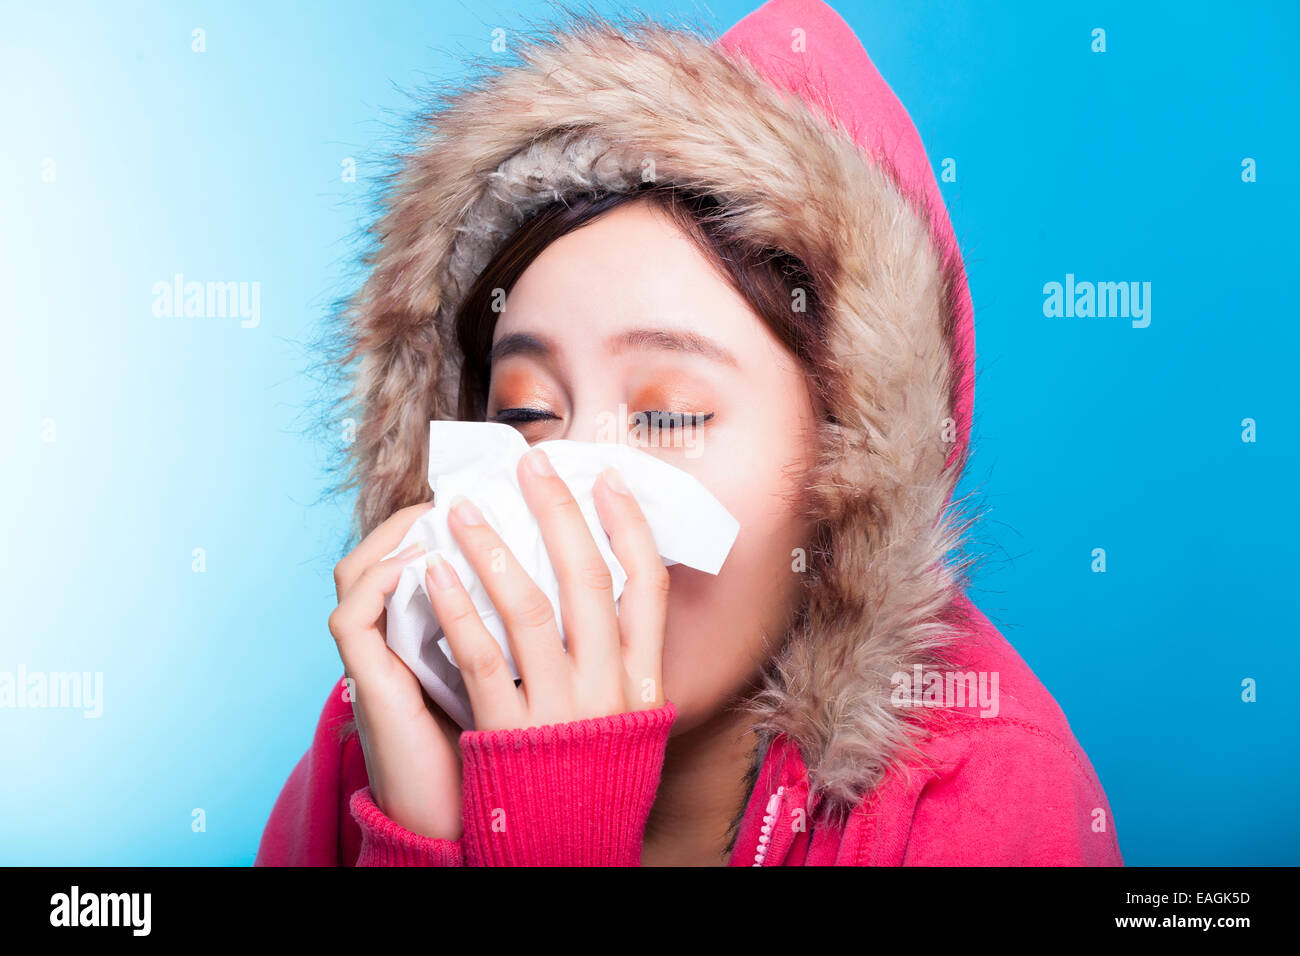 young Woman blowing her nose Stock Photo